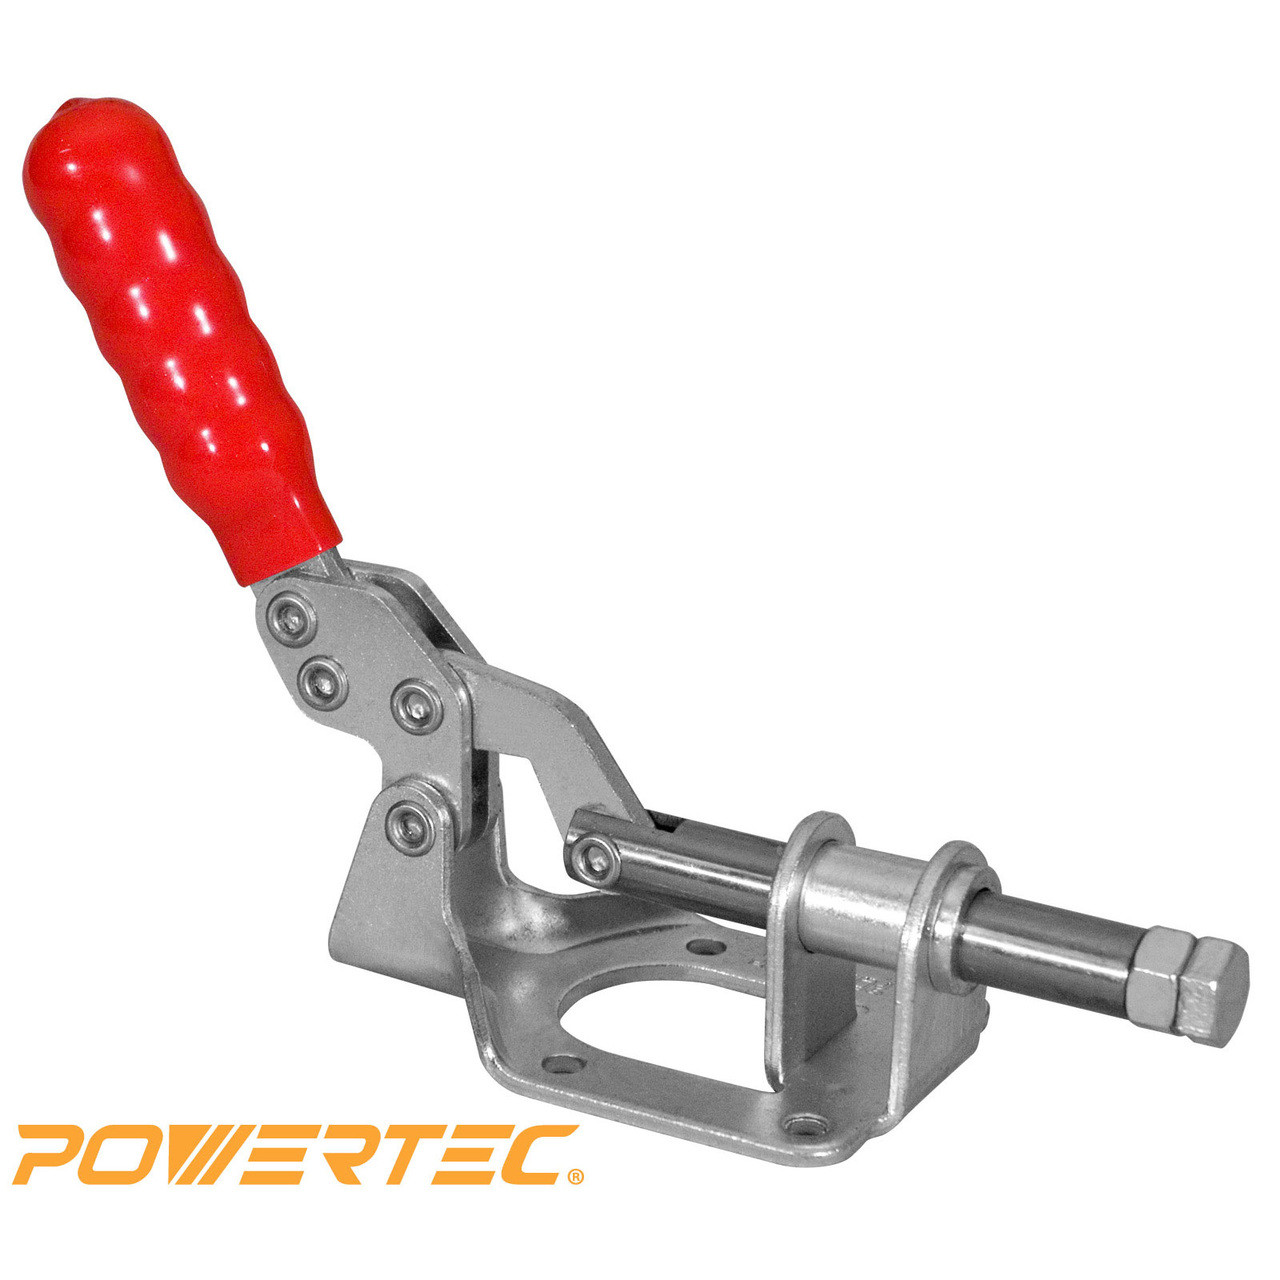 POWERTEC 20307 Latch-Action Toggle Clamp, 700 lbs Capacity, 431